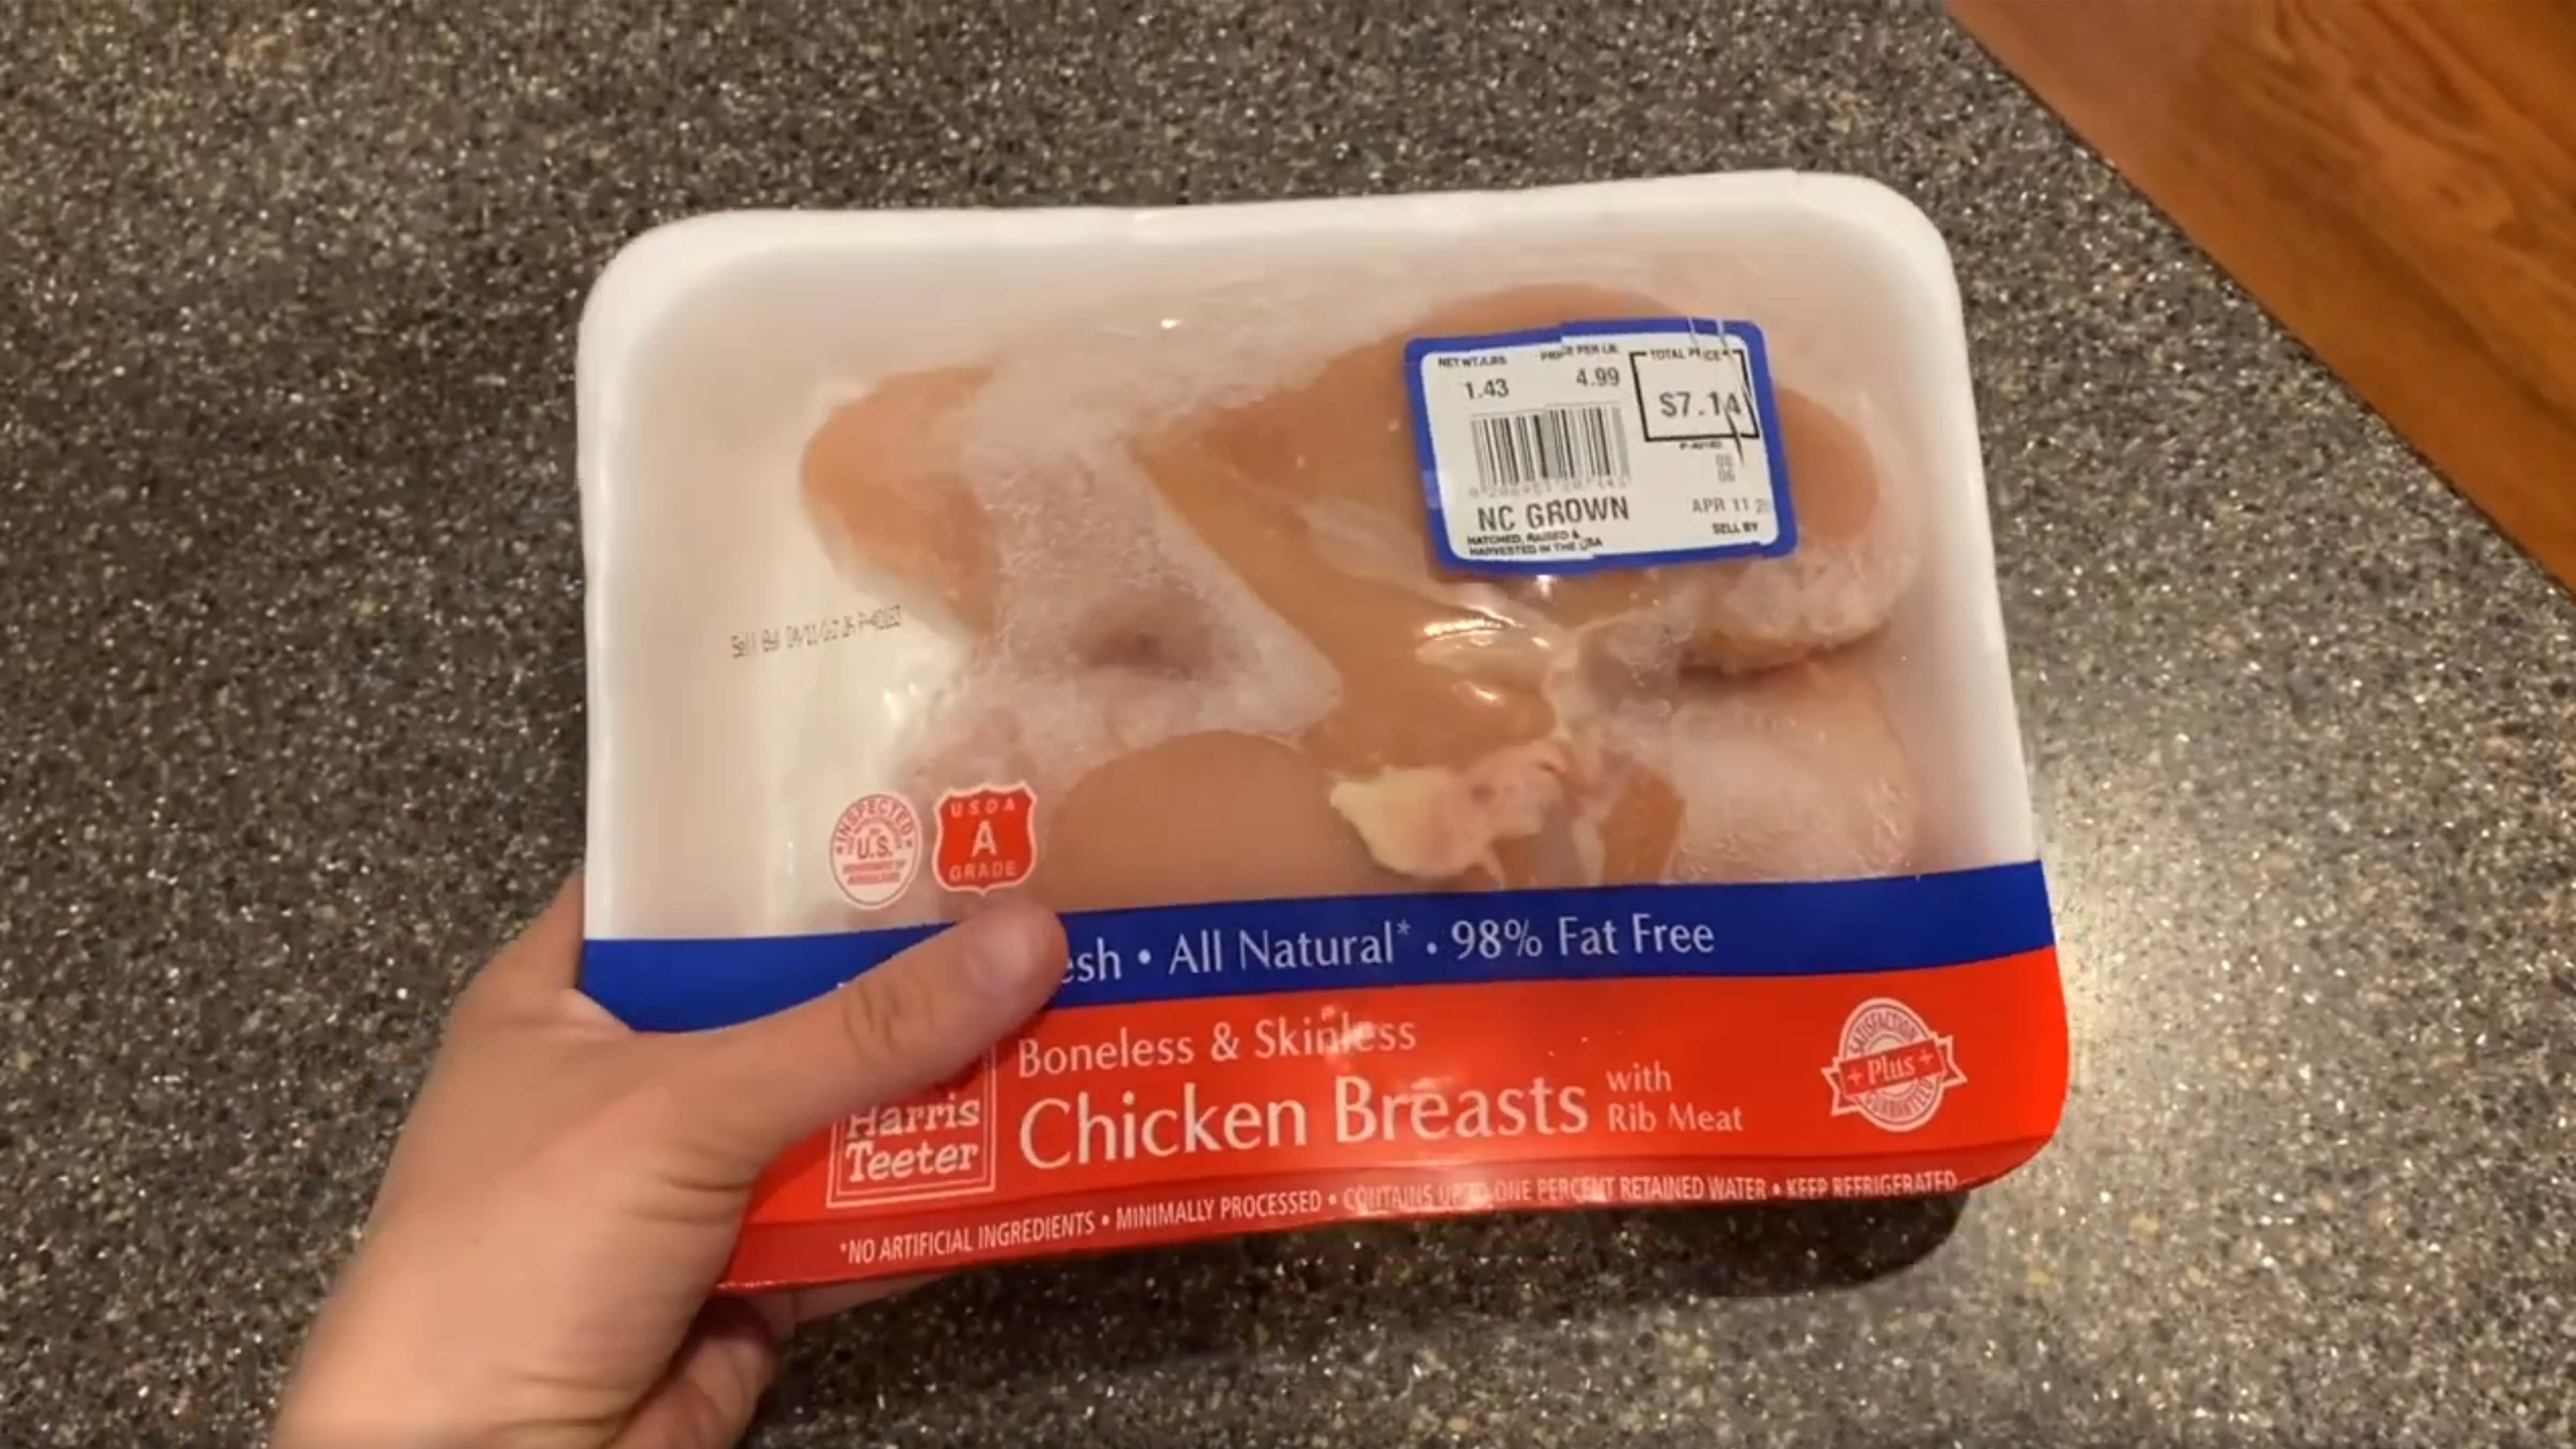 A woman's hand holding a package of frozen chicken.